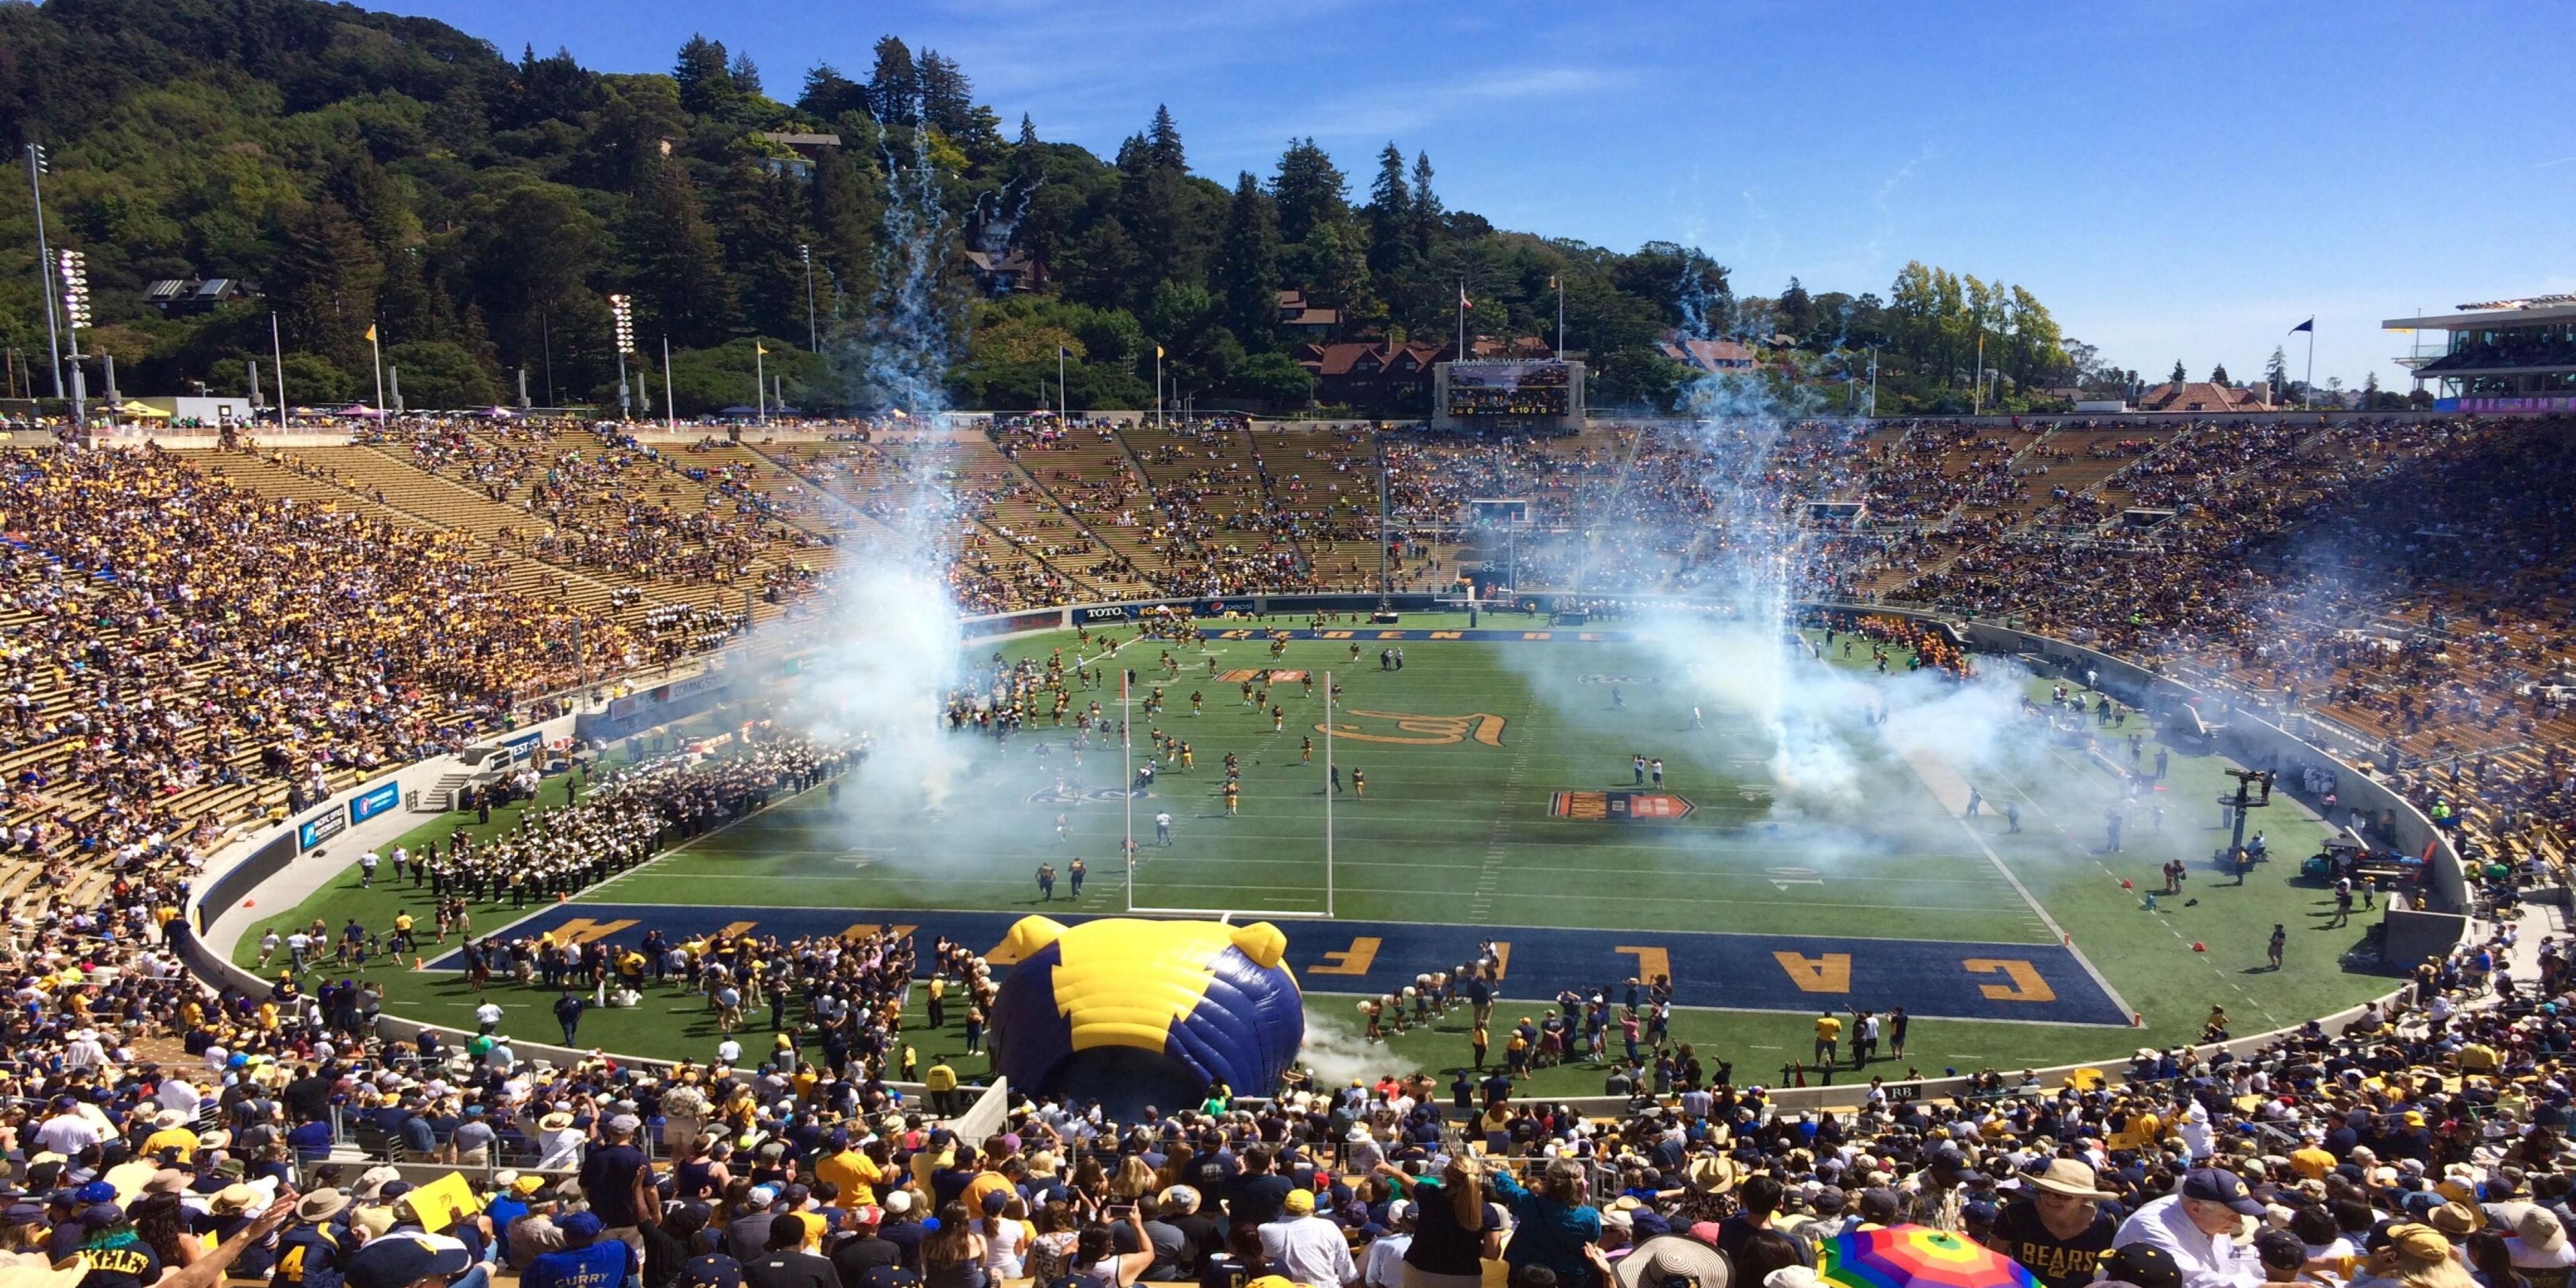 California Memorial Stadium is located two miles from the hotel. Book your tickets now! 